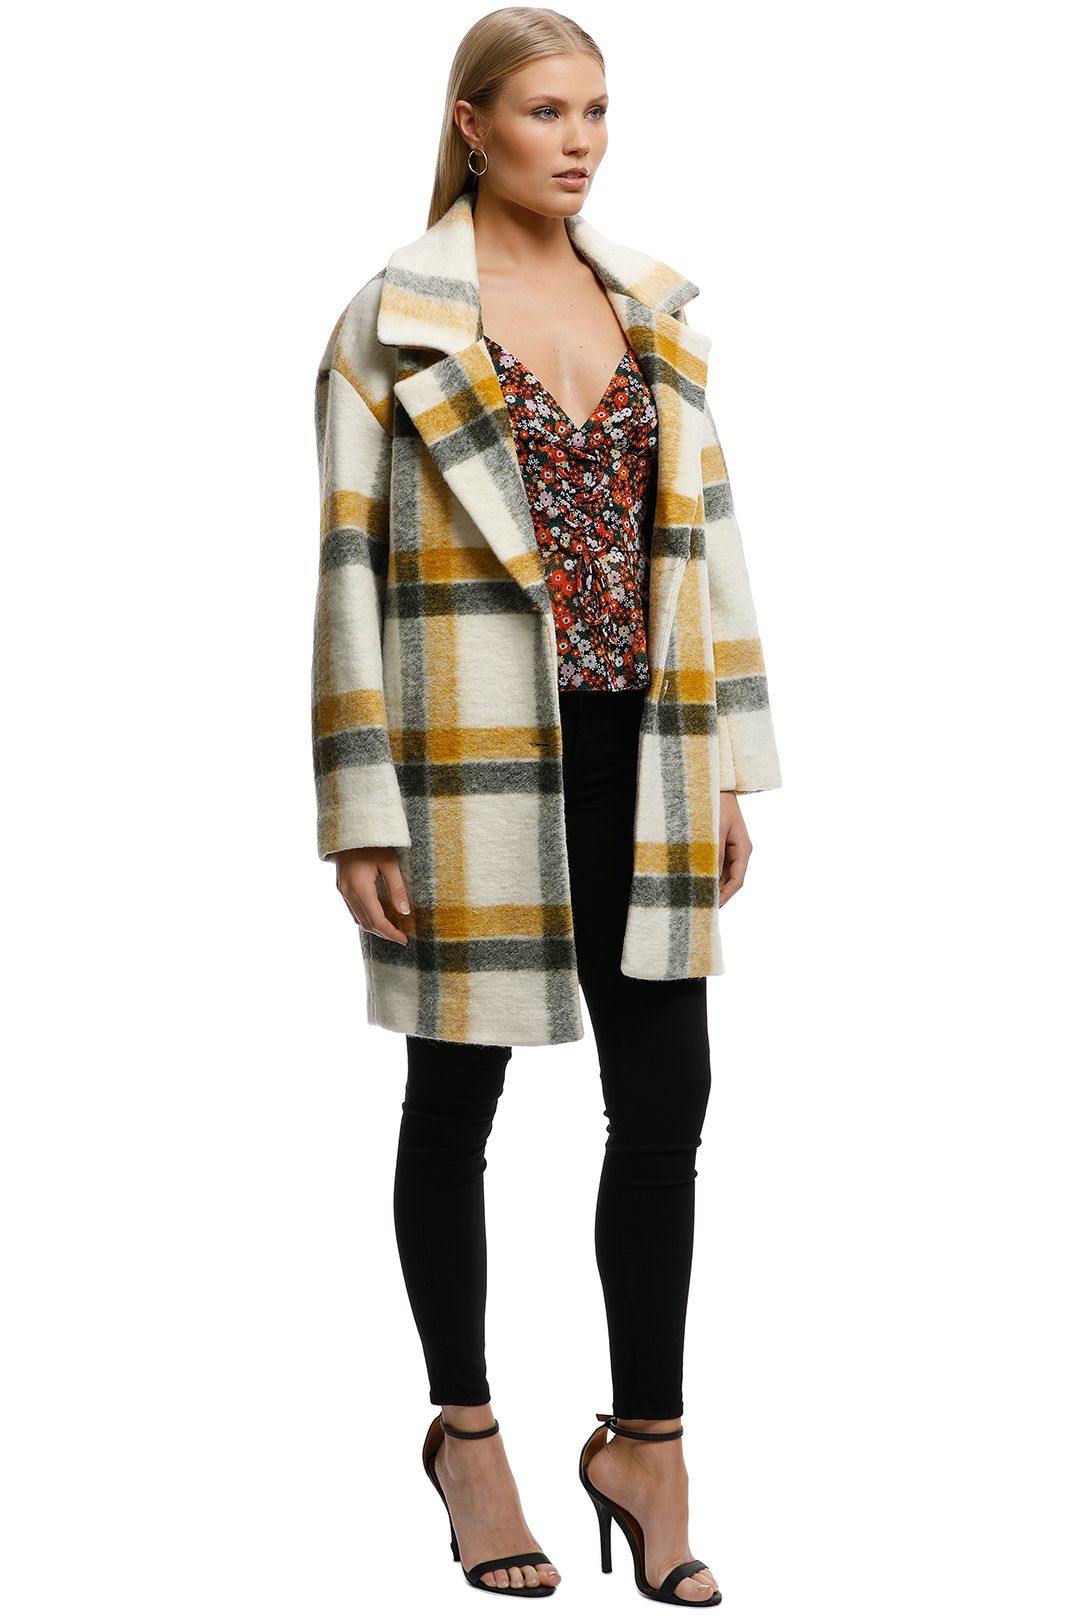 MNG - Unstructured Virgin Wool Coat - Check Print - Side